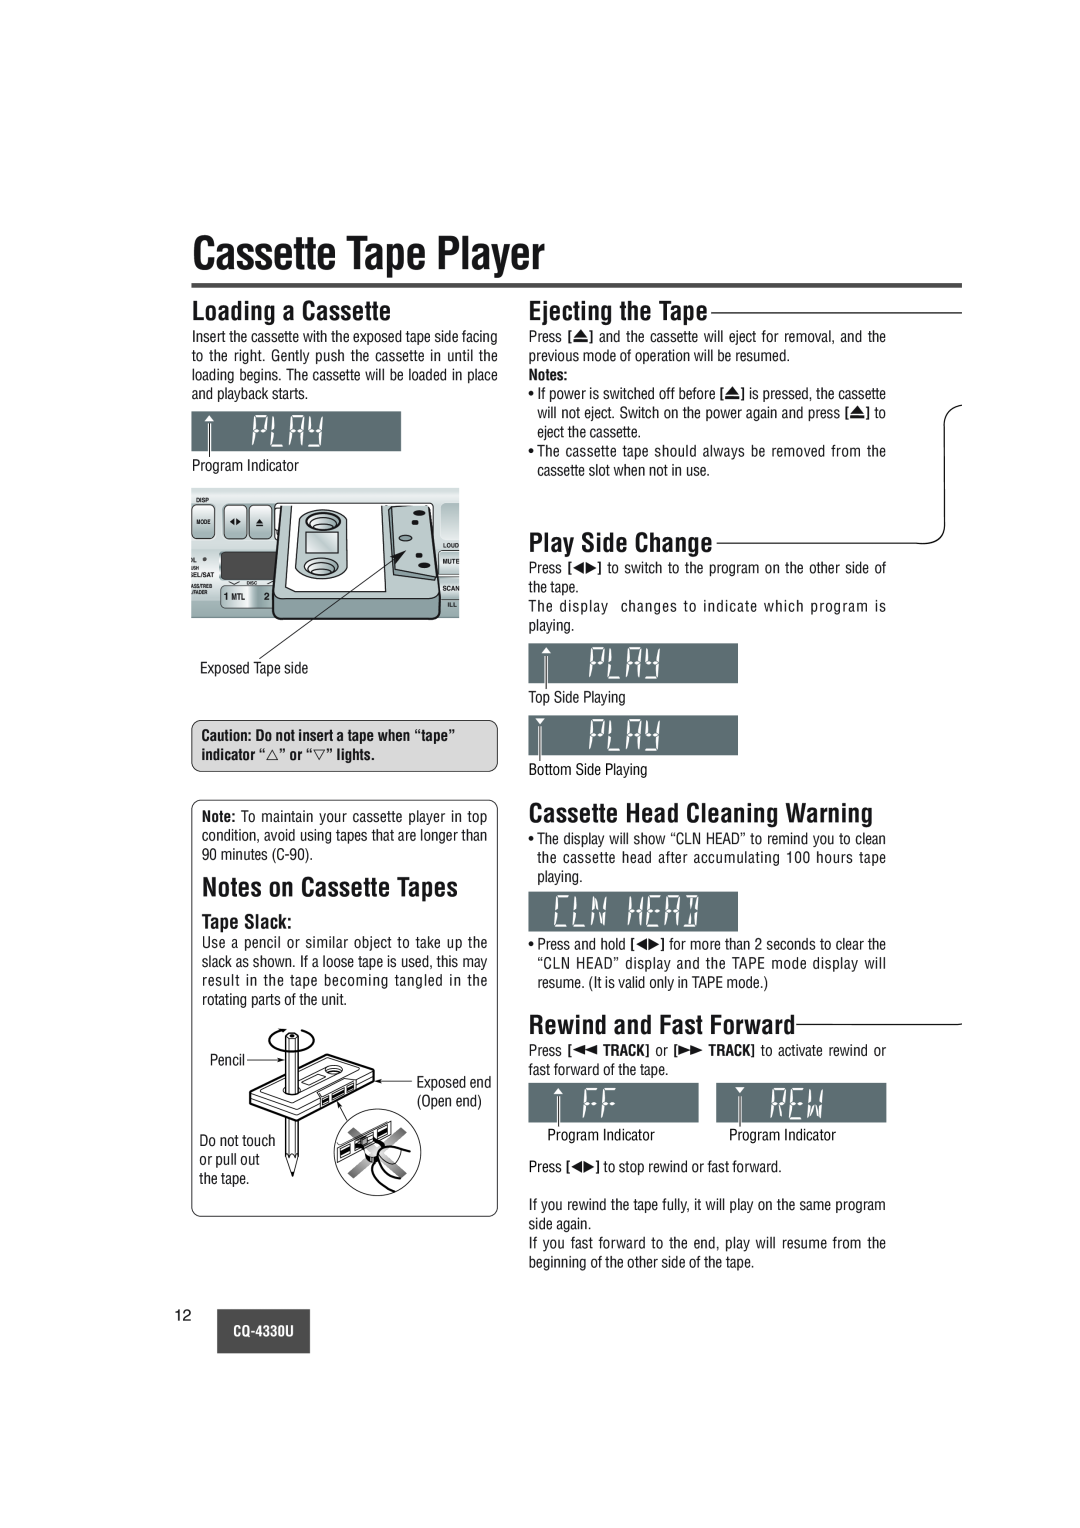 Panasonic CQ-4330U Cassette Tape Player, Loading a Cassette, Ejecting the Tape, Play Side Change, Notes on Cassette Tapes 